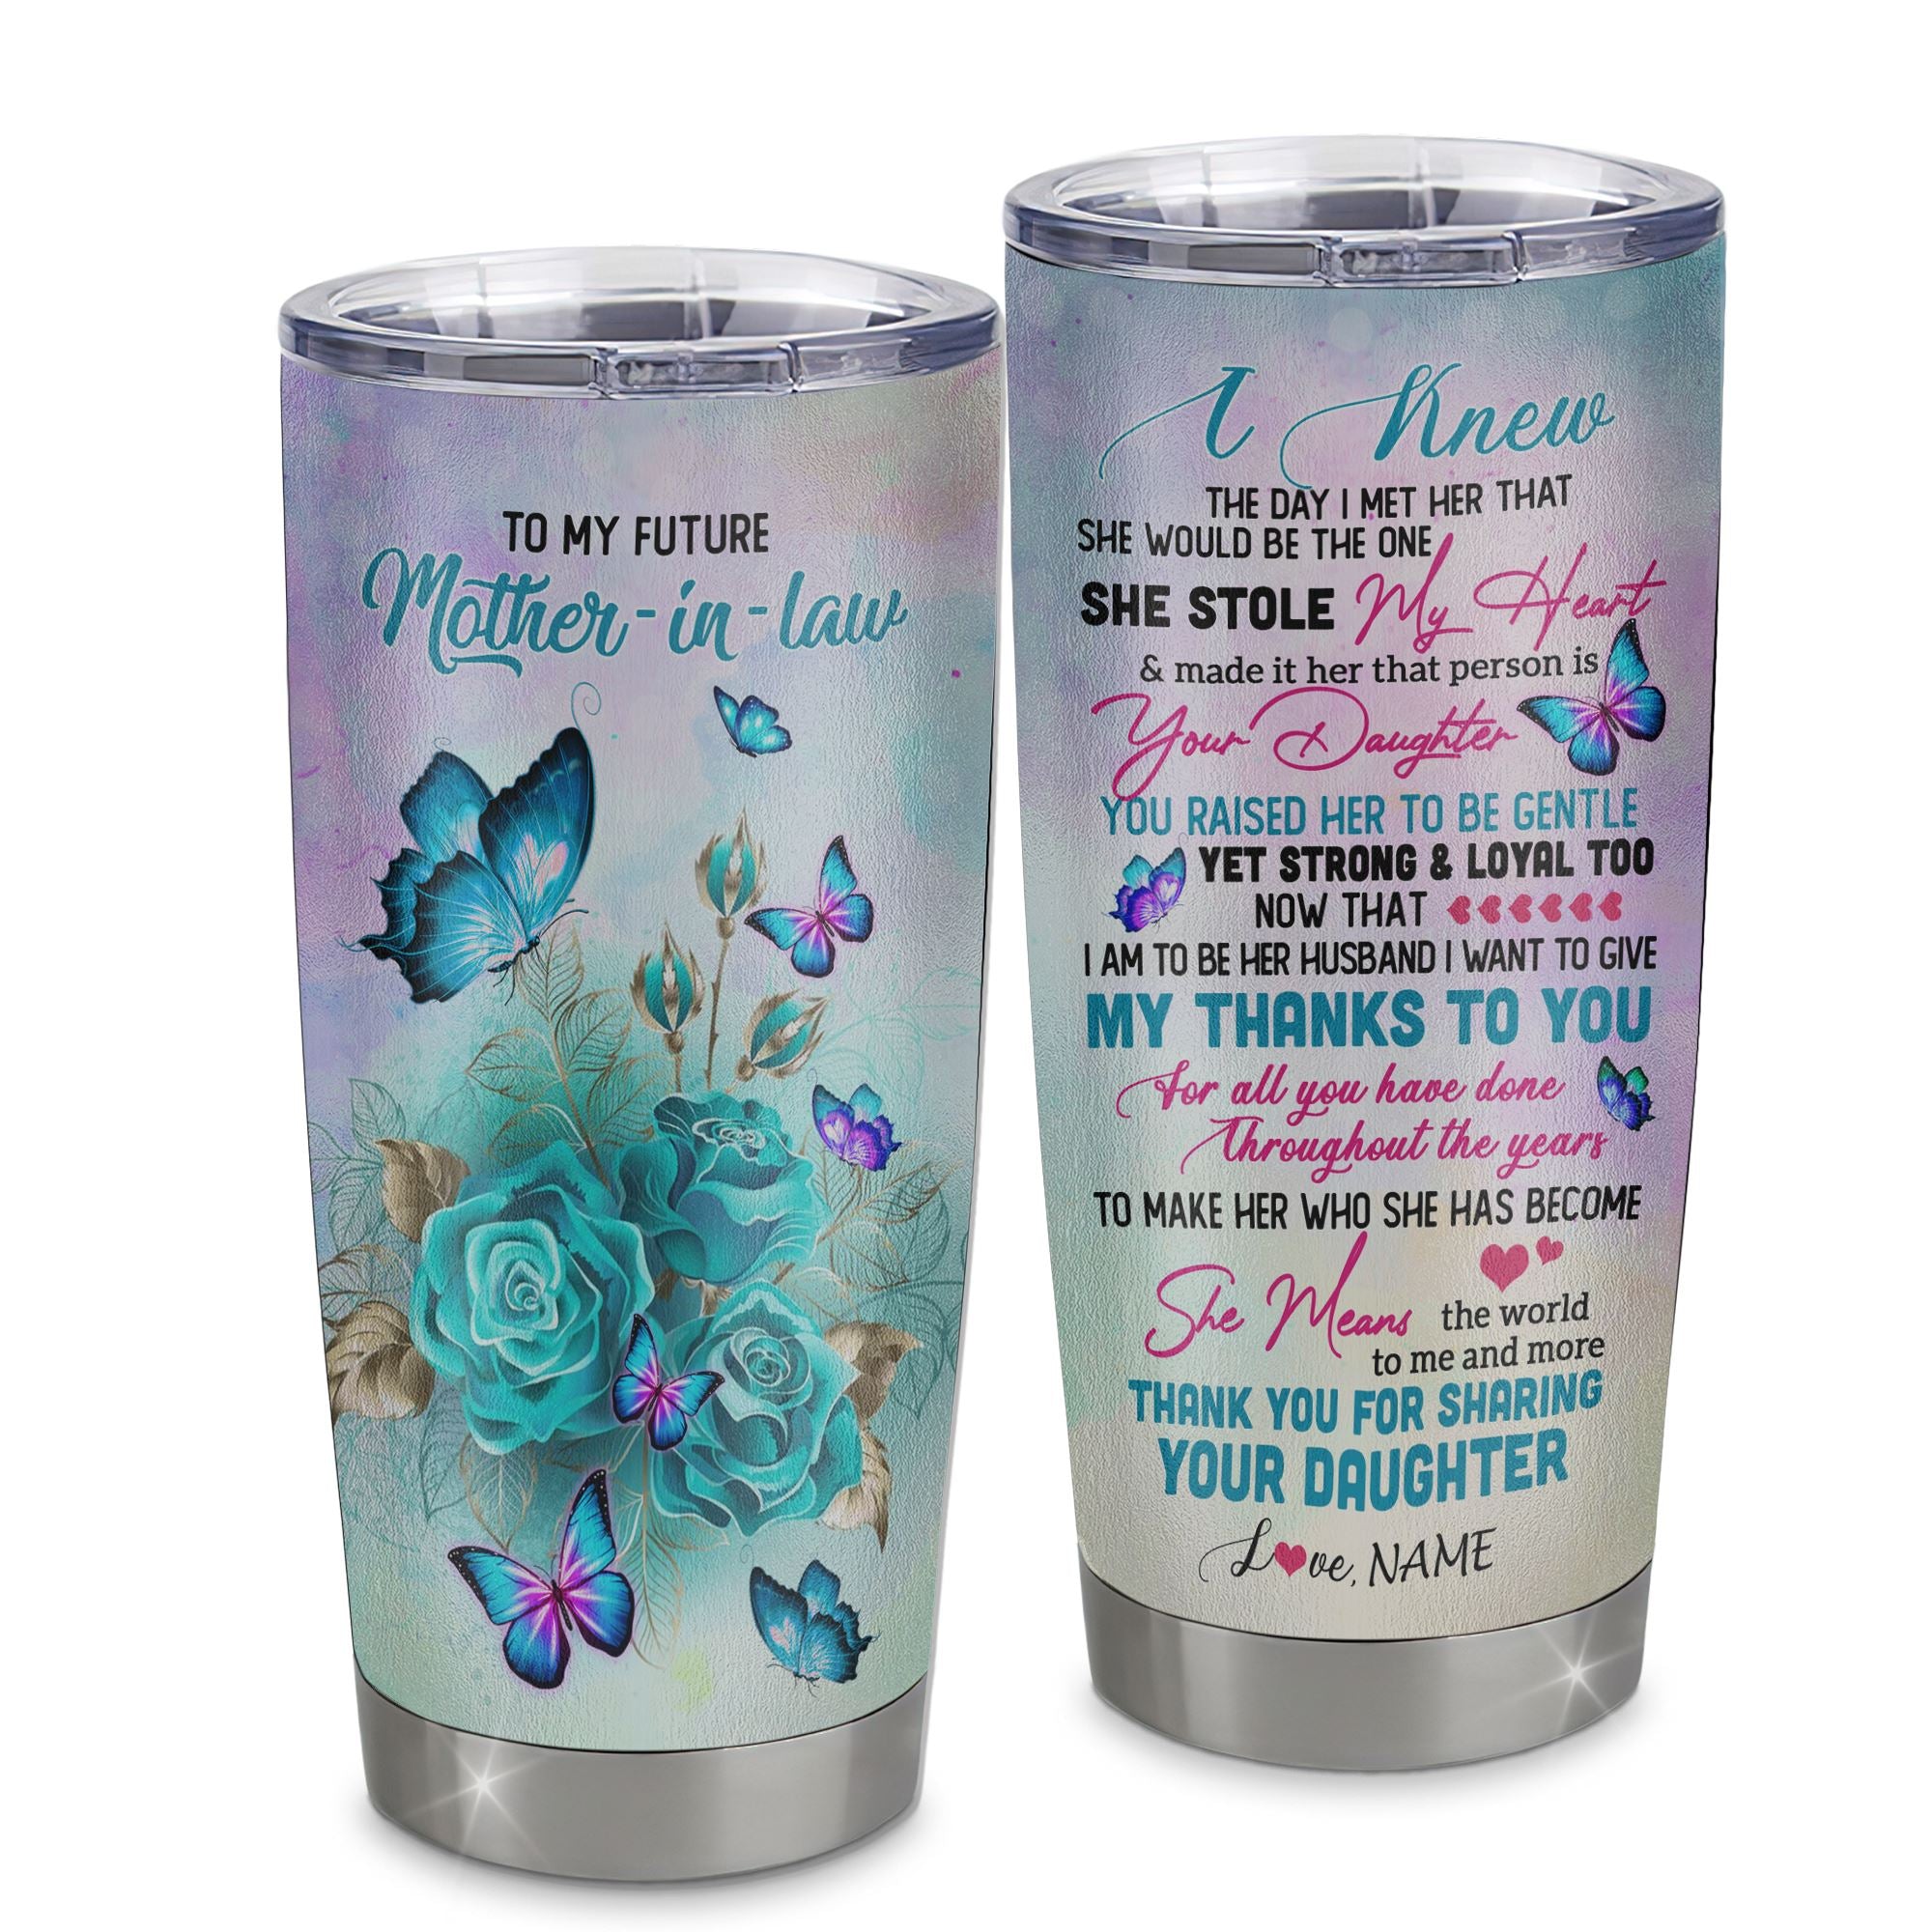 Personalized_To_My_Future_Mother_In_Law_From_Son_Stainless_Steel_Tumbler_Cup_Thank_You_For_Sharing_Your_Daughter_Mother_In_Law_Birthday_Mothers_Day_Christmas_Travel_Mug_Tumbler_mockup-1.jpg